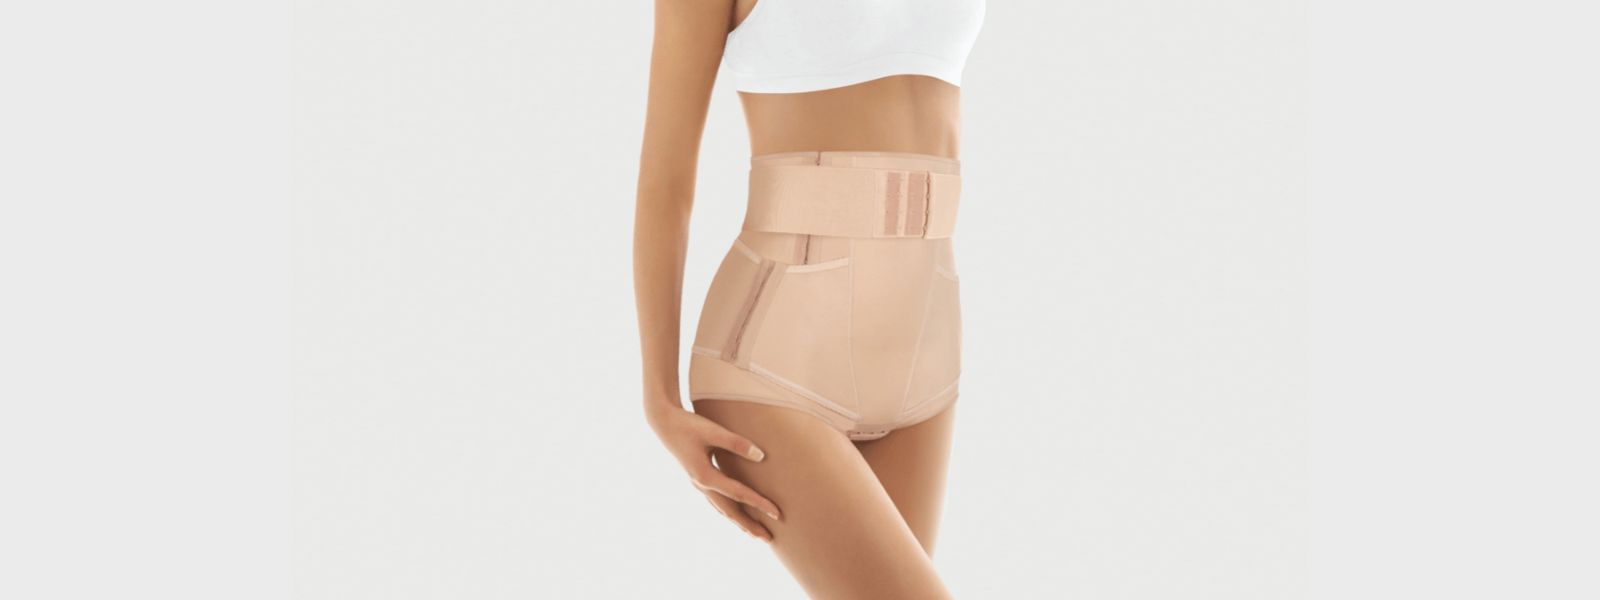 How long should you wear the girdle after the tummy tuck - Plastic Surgeon